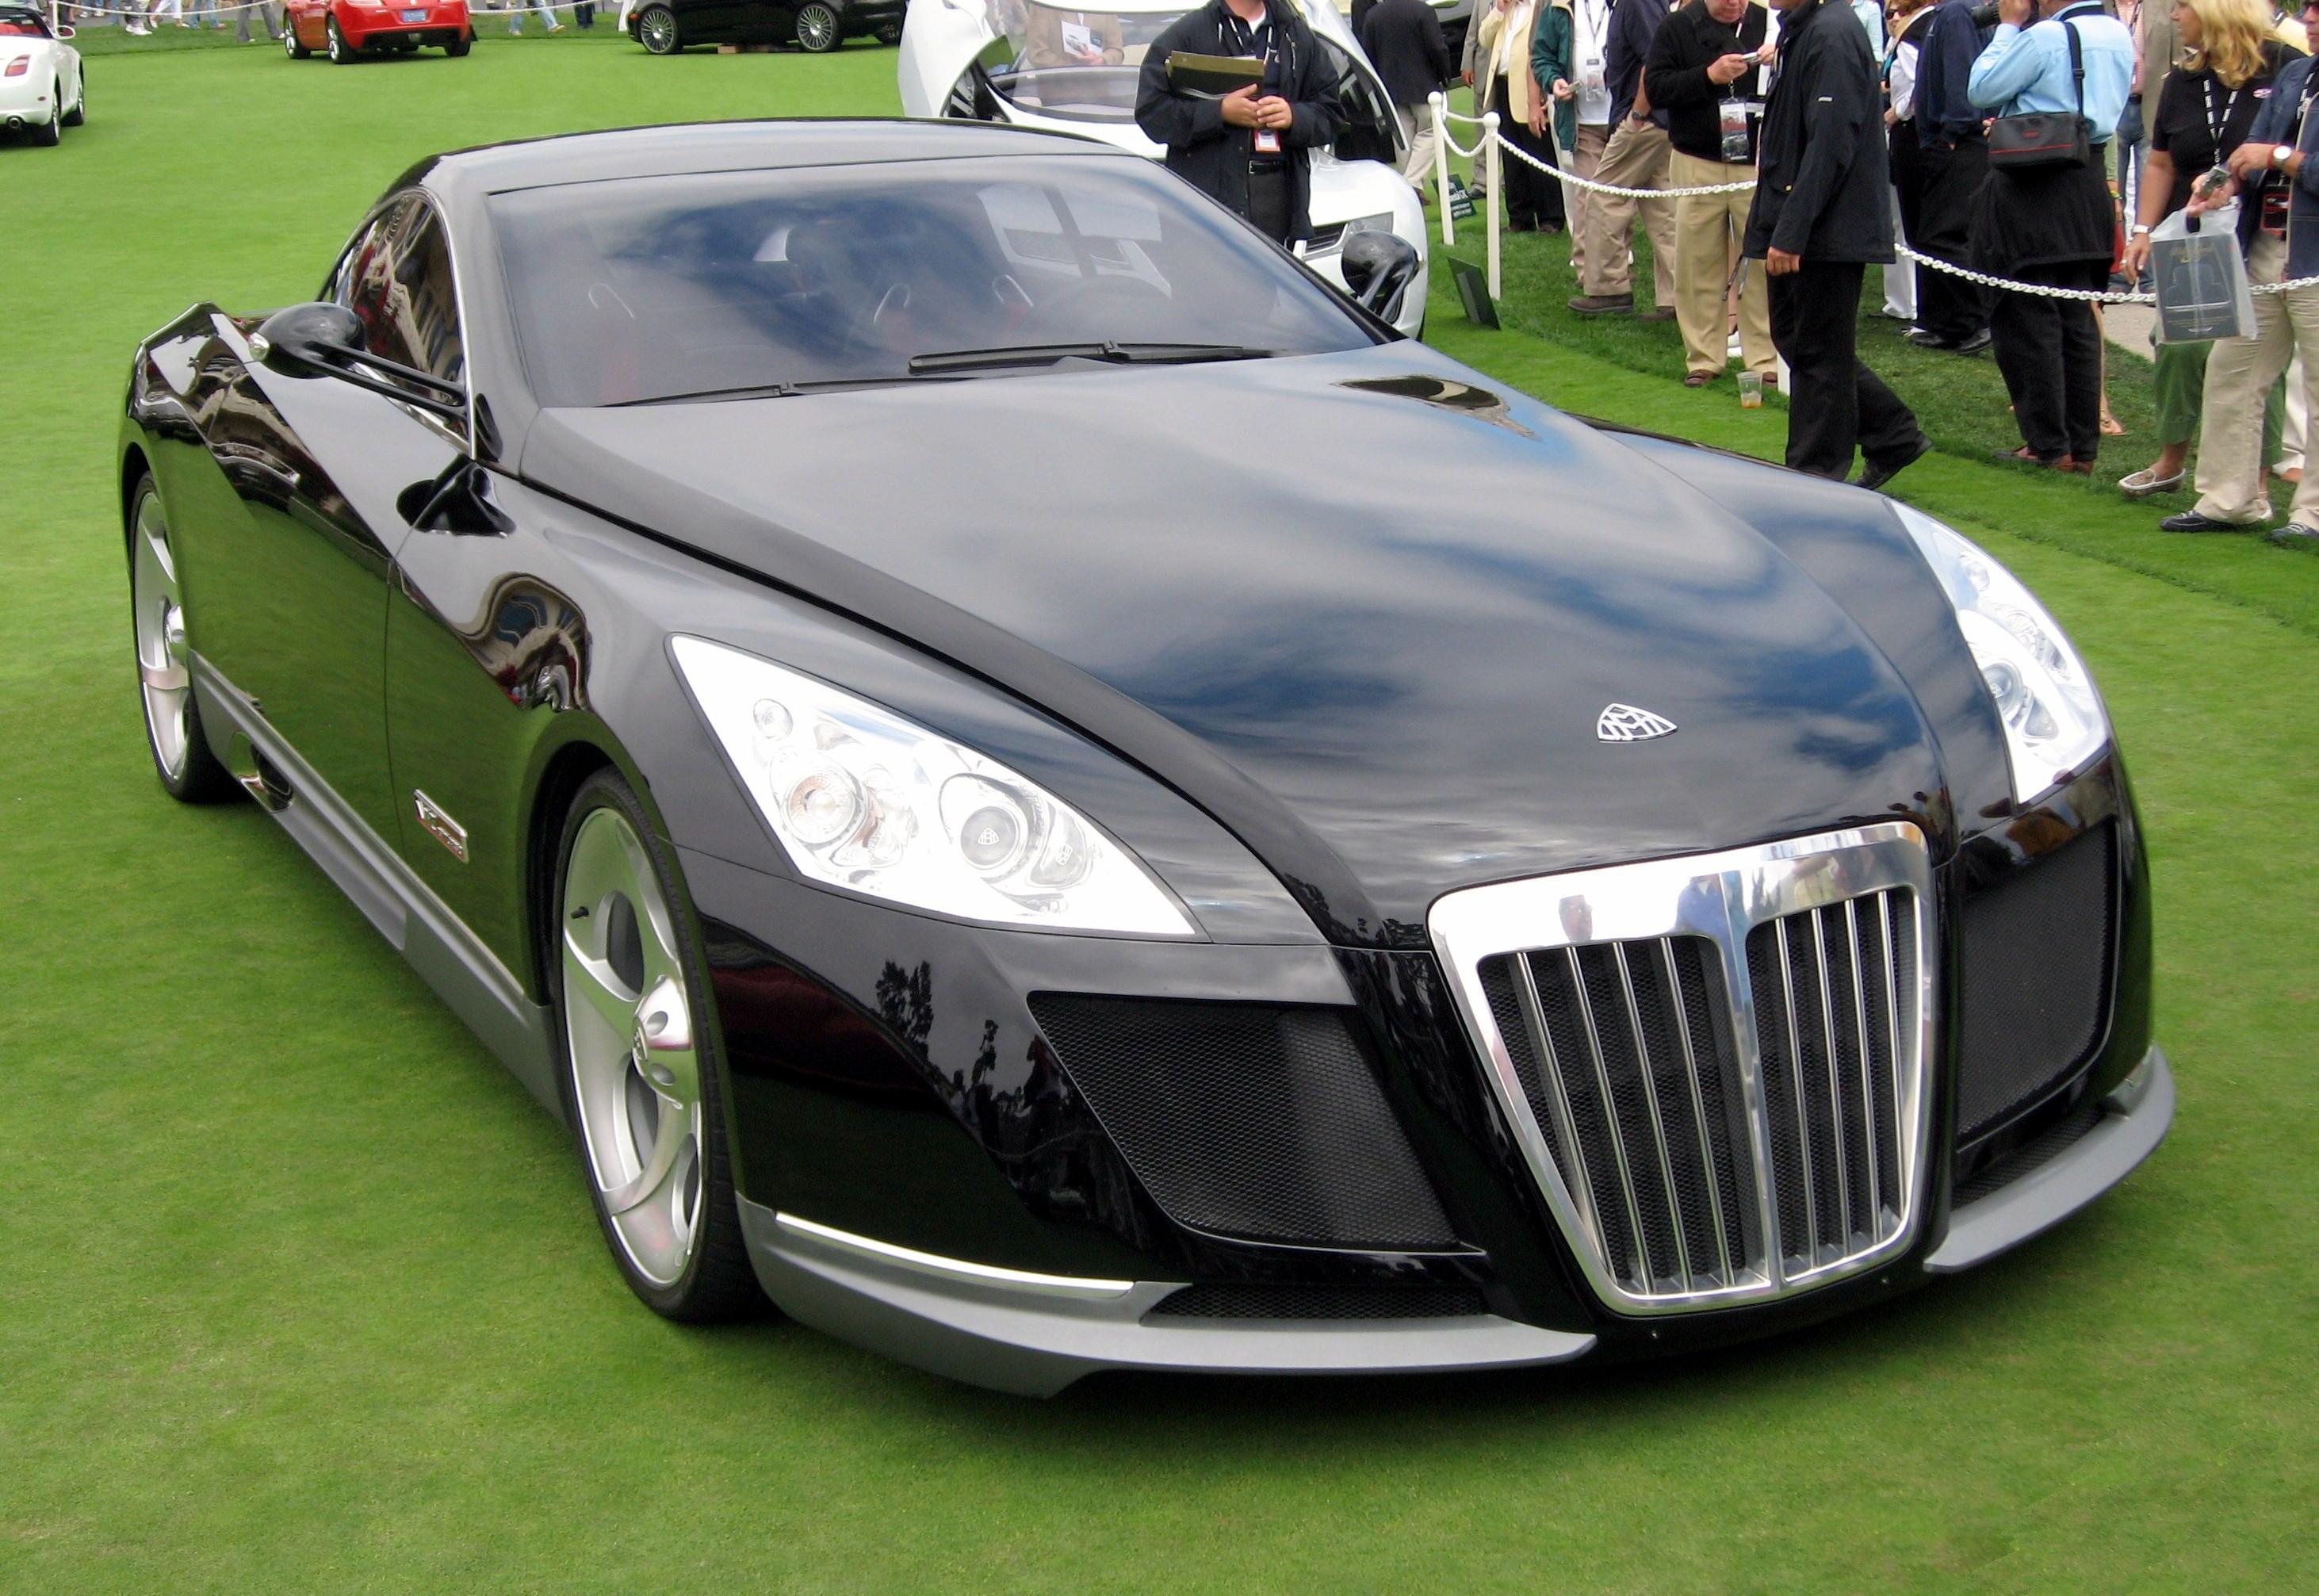 Do you know the history behind the Maybach Exelero?